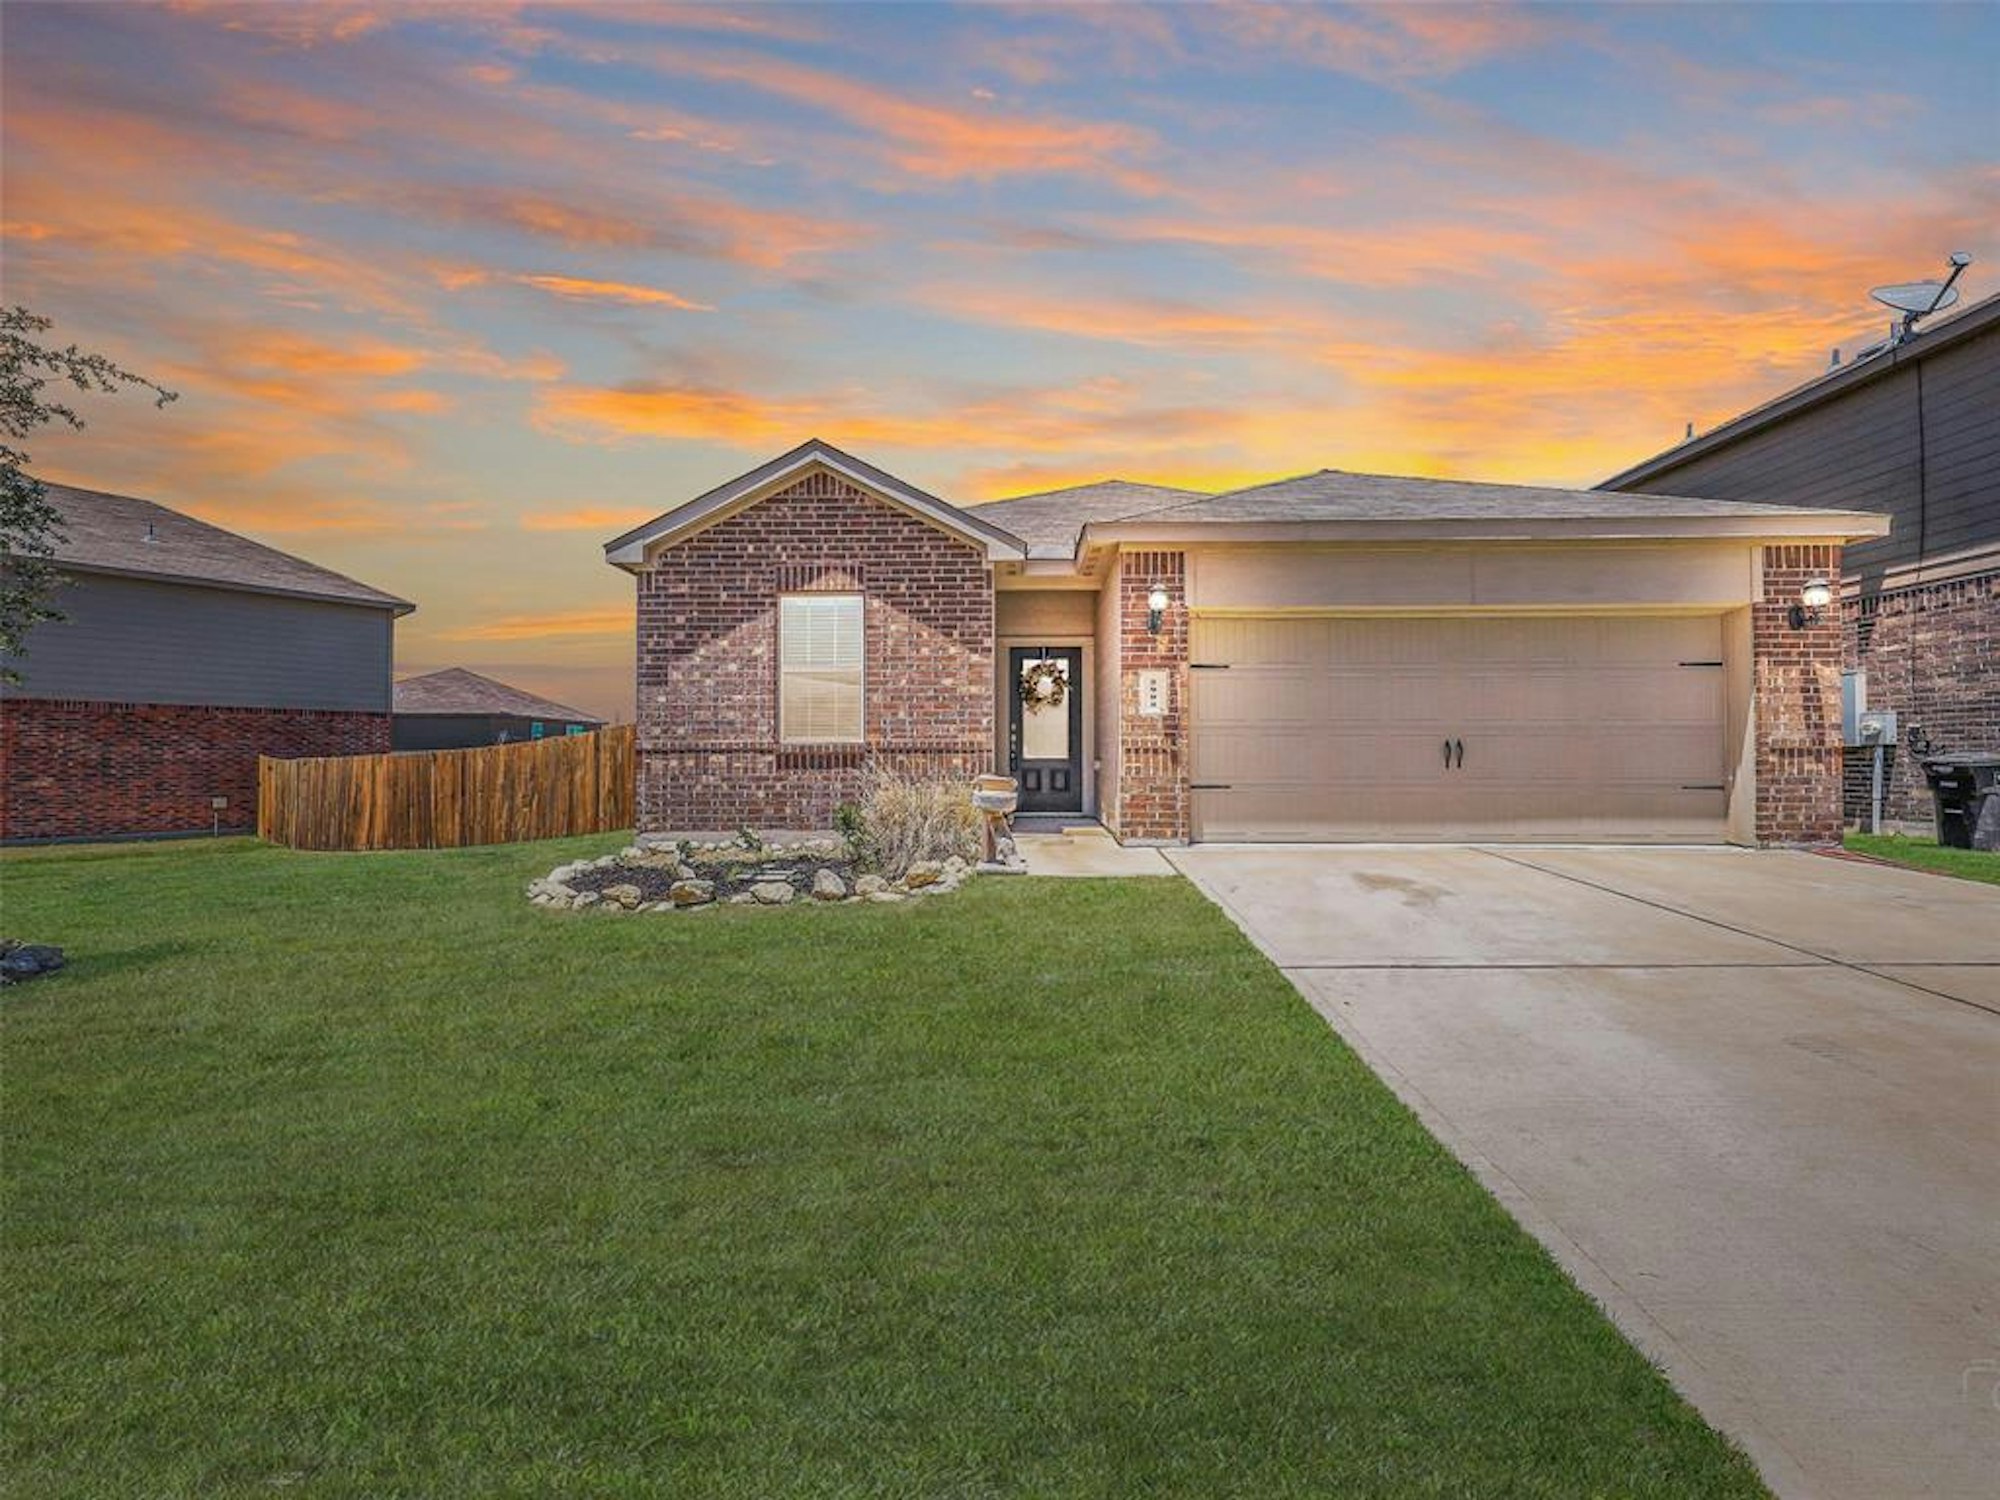 Photo 1 of 25 - 5908 Obsidian Creek Dr, Fort Worth, TX 76179